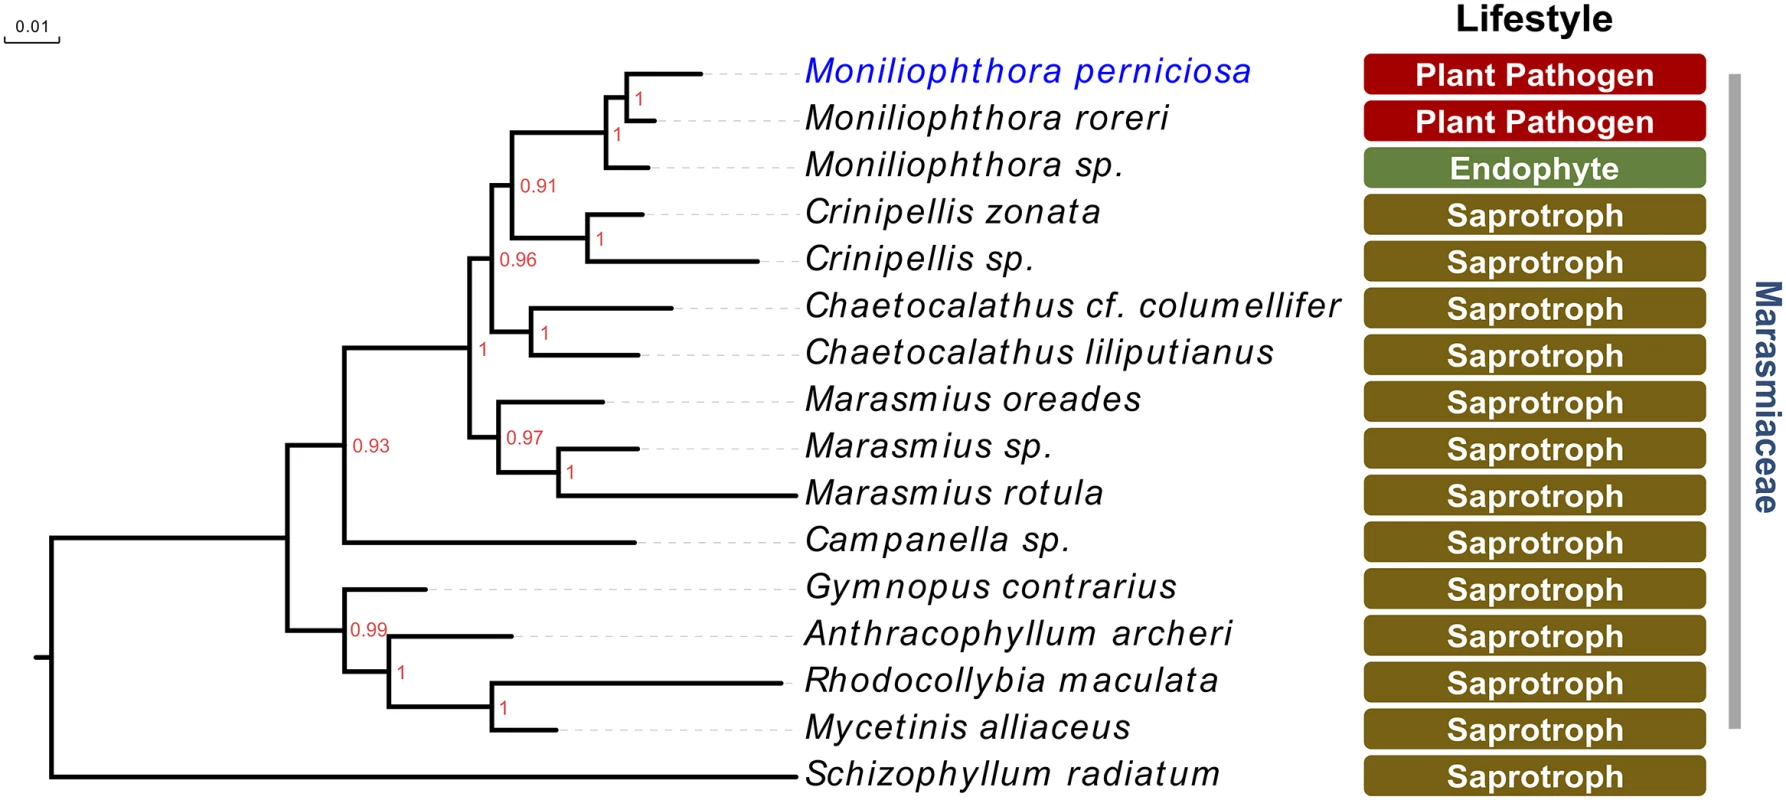 The pathogenic lifestyle of <i>M</i>. <i>perniciosa</i> is an exception within the Marasmiaceae family of basidiomycetes, which is mostly composed of saprotrophic litter and wood-decomposing fungi.